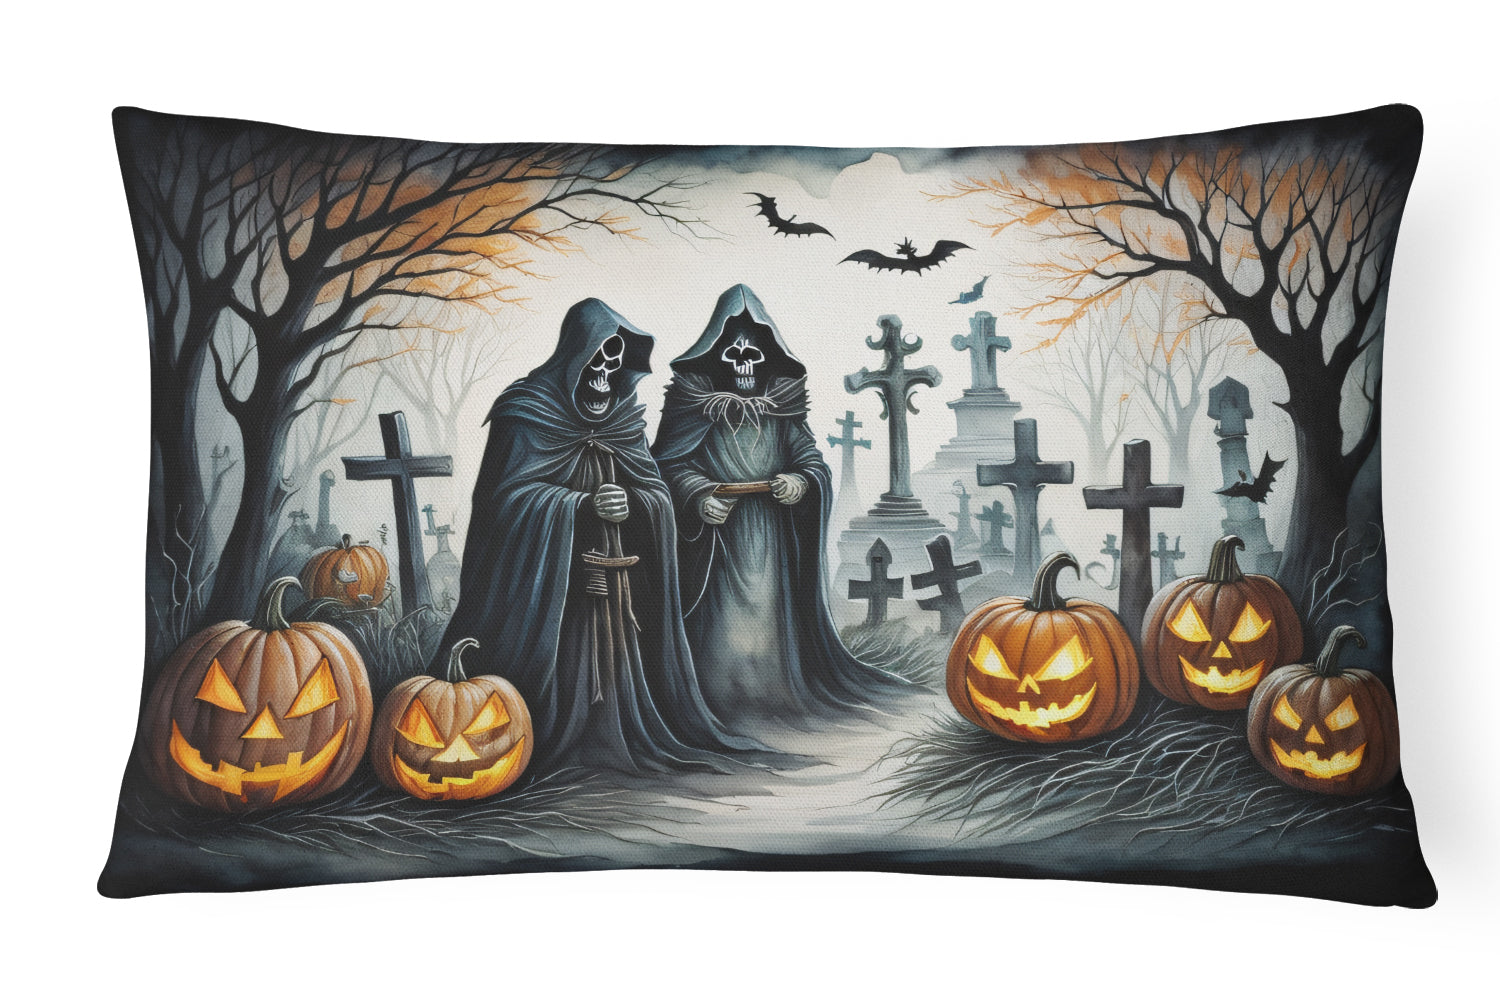 Buy this The Grim Reaper Spooky Halloween Fabric Decorative Pillow